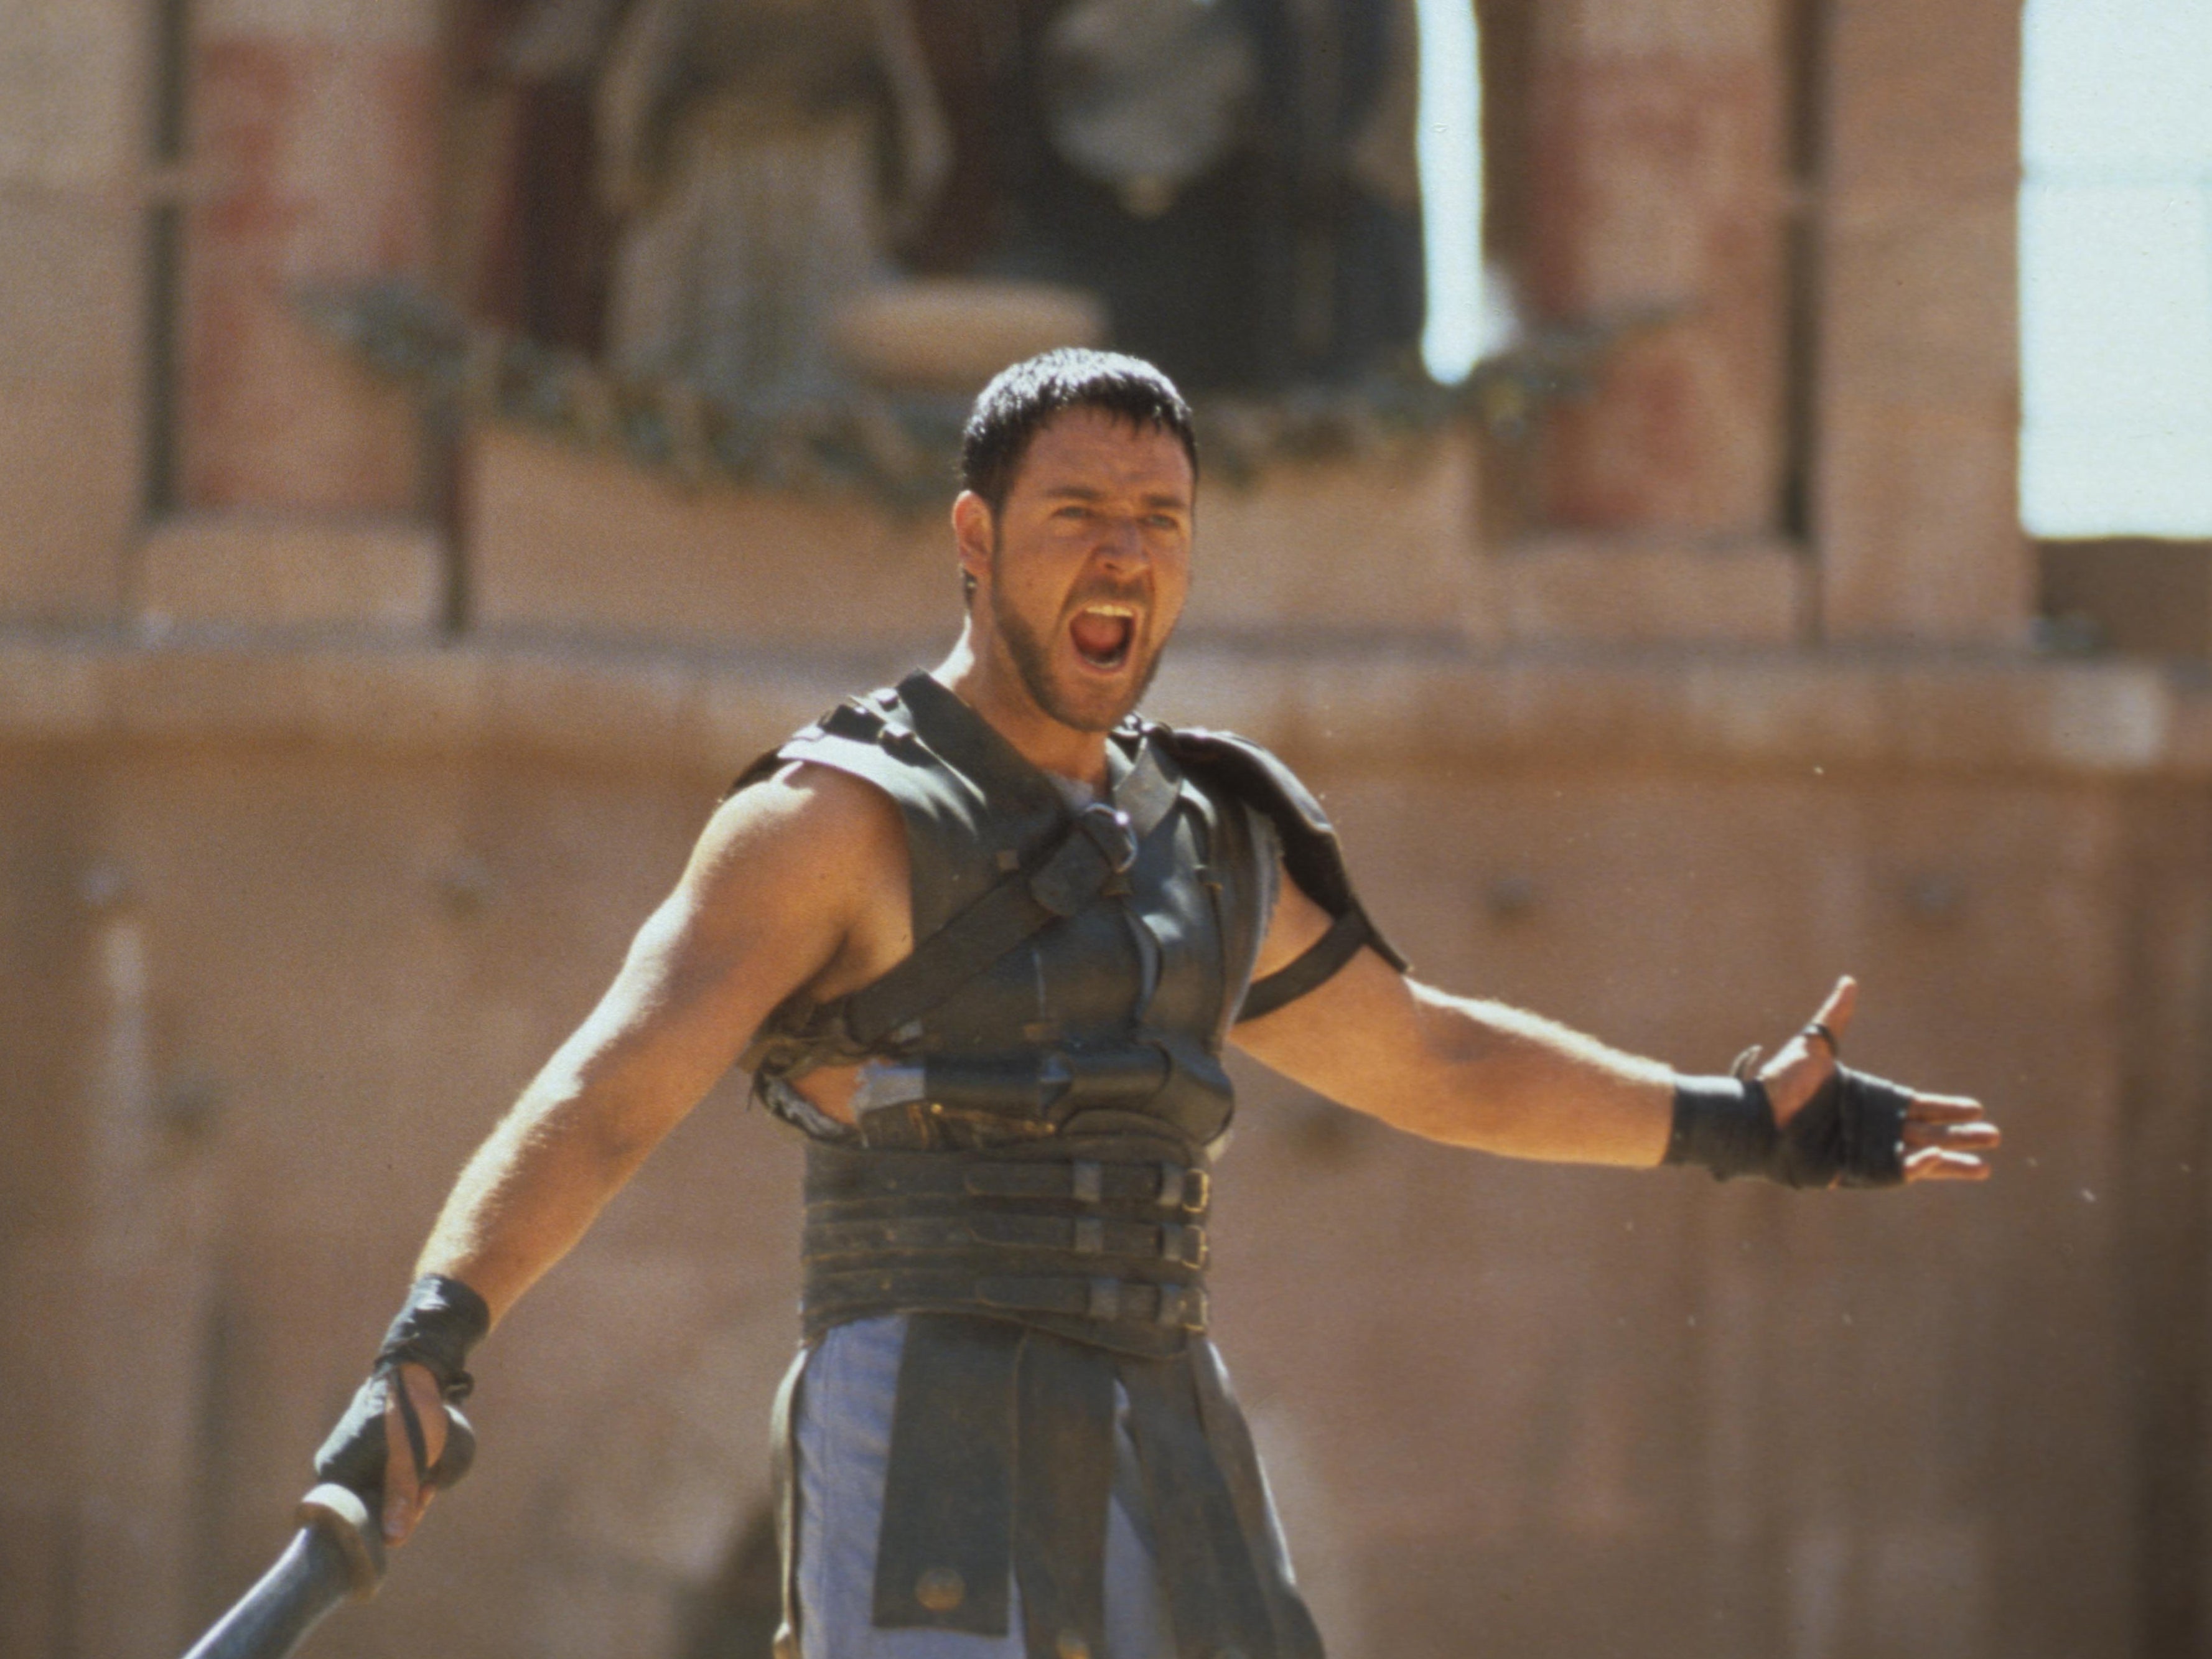 Russell Crowe in ‘Gladiator’